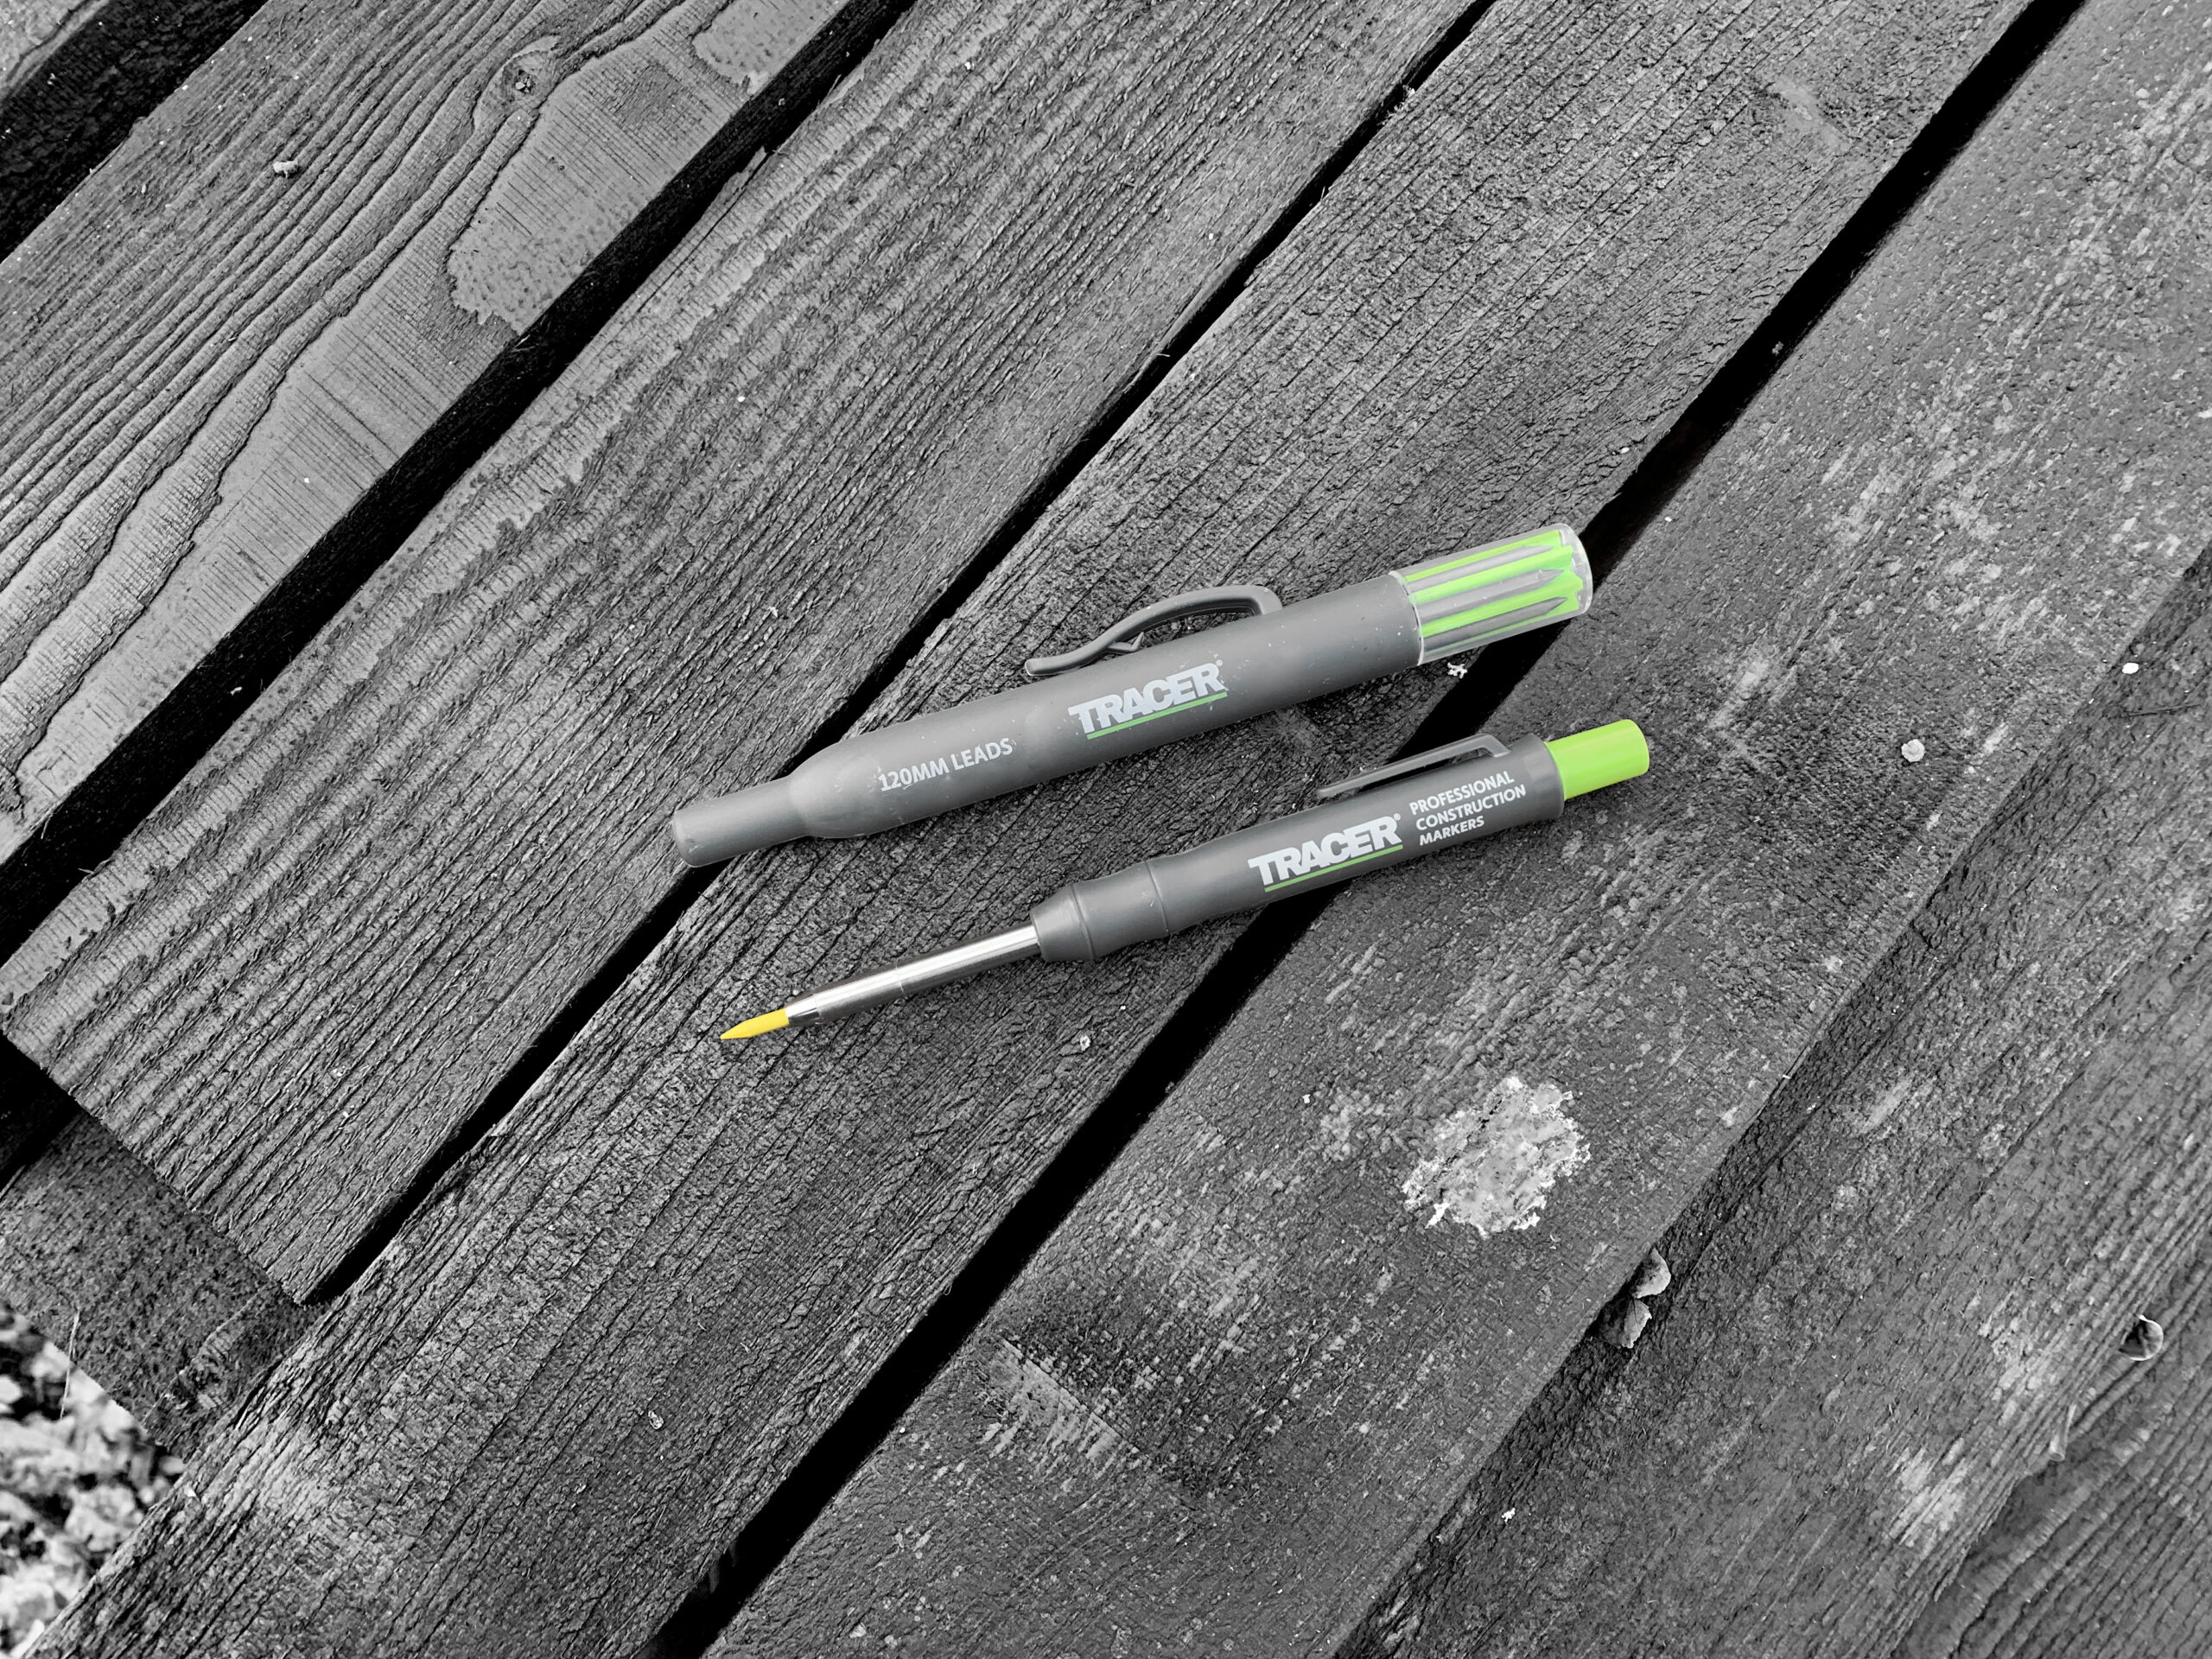 TRACER Tools - UK - Hands up if you need this marking kit